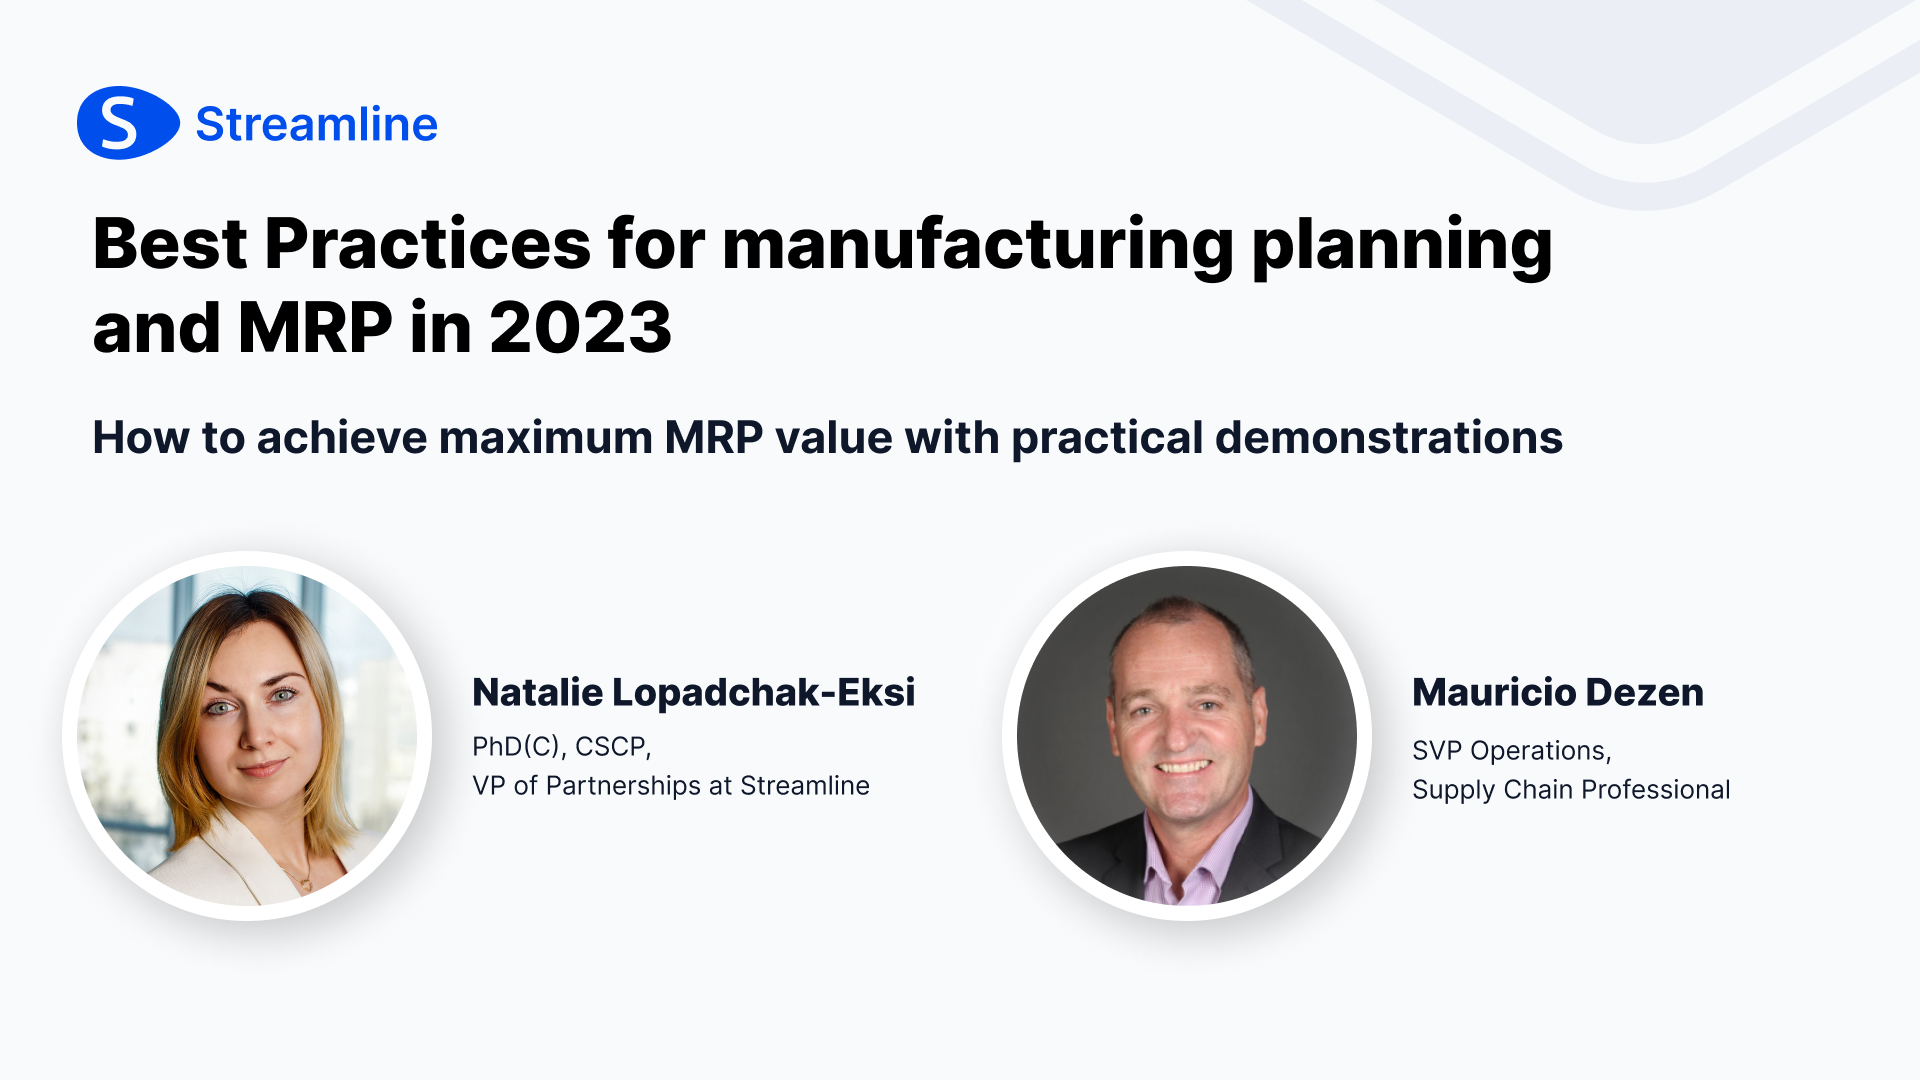 Best Practices for manufacturing planning and MRP in 2023